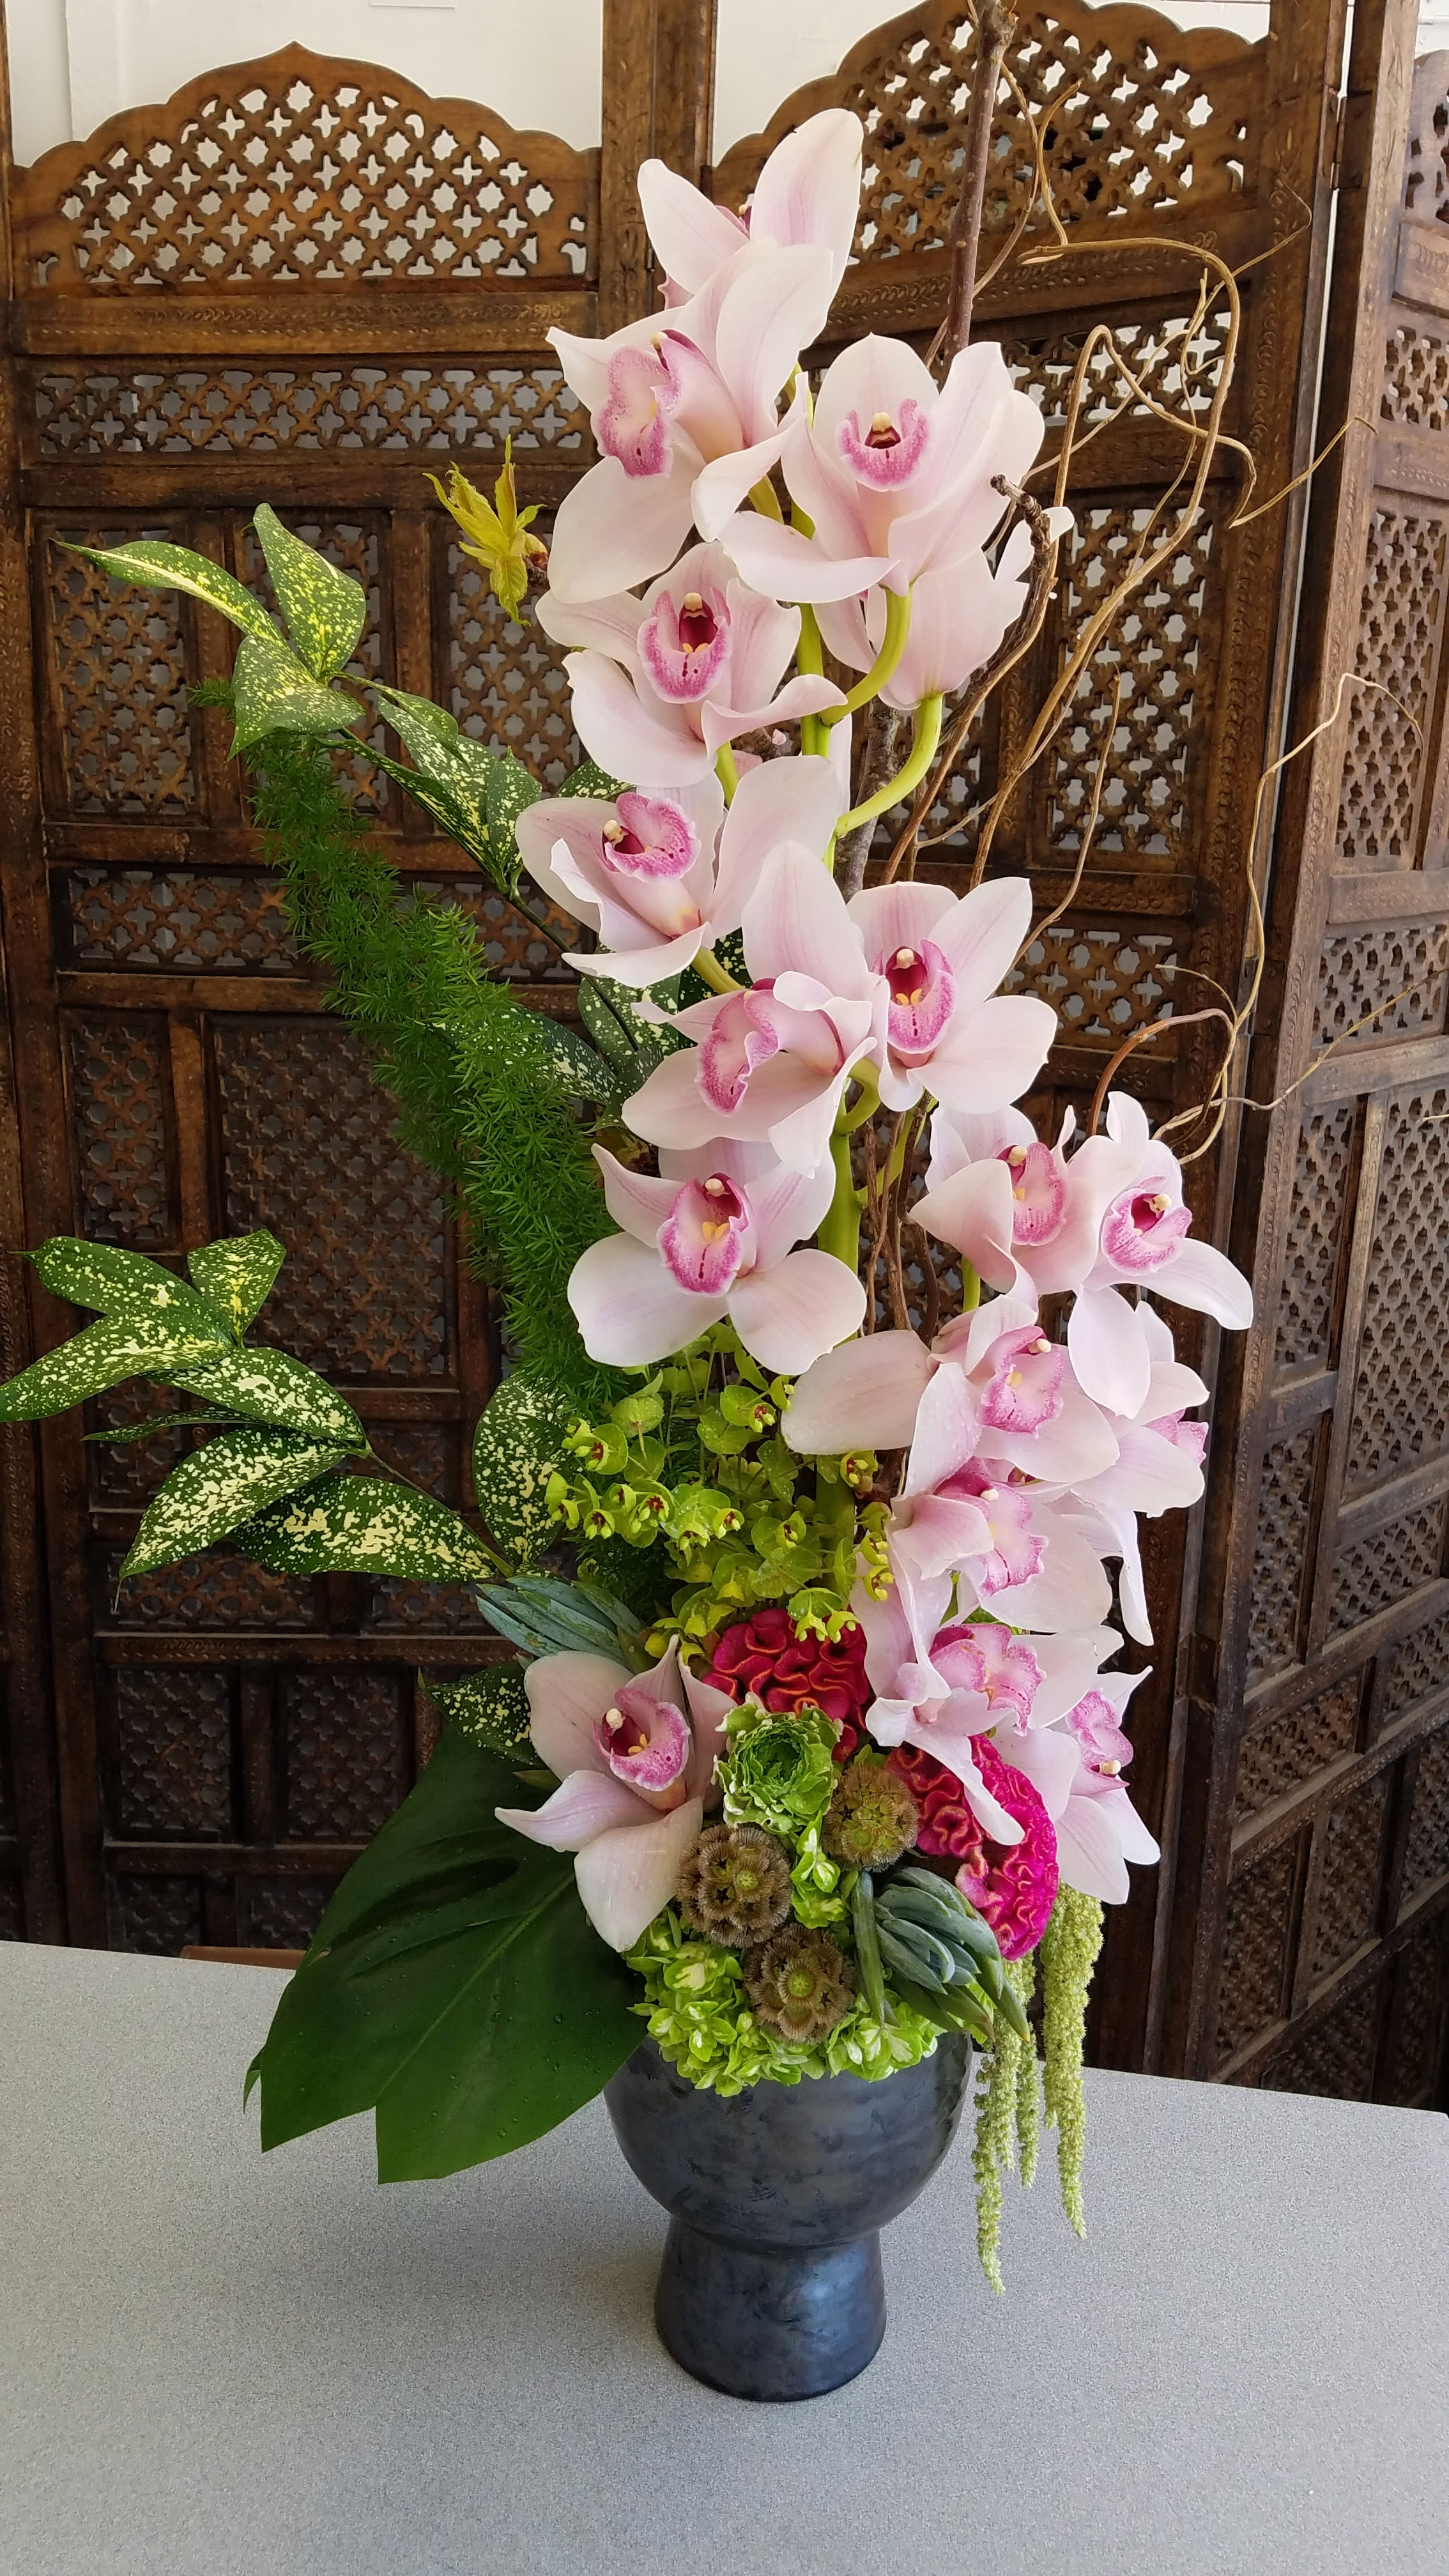 CYMBIDIUM BLISS - Built from a beautiful dark grey ceramic container, Pink (or other color) Cymbidium Orchids shoot upwards and create a wonderful long lasting design.  This arrangement is based with Green Hydrangea, Coxcomb and Scabiosa pods.  This will add a touch of &quot;Zen&quot; to any office or home.